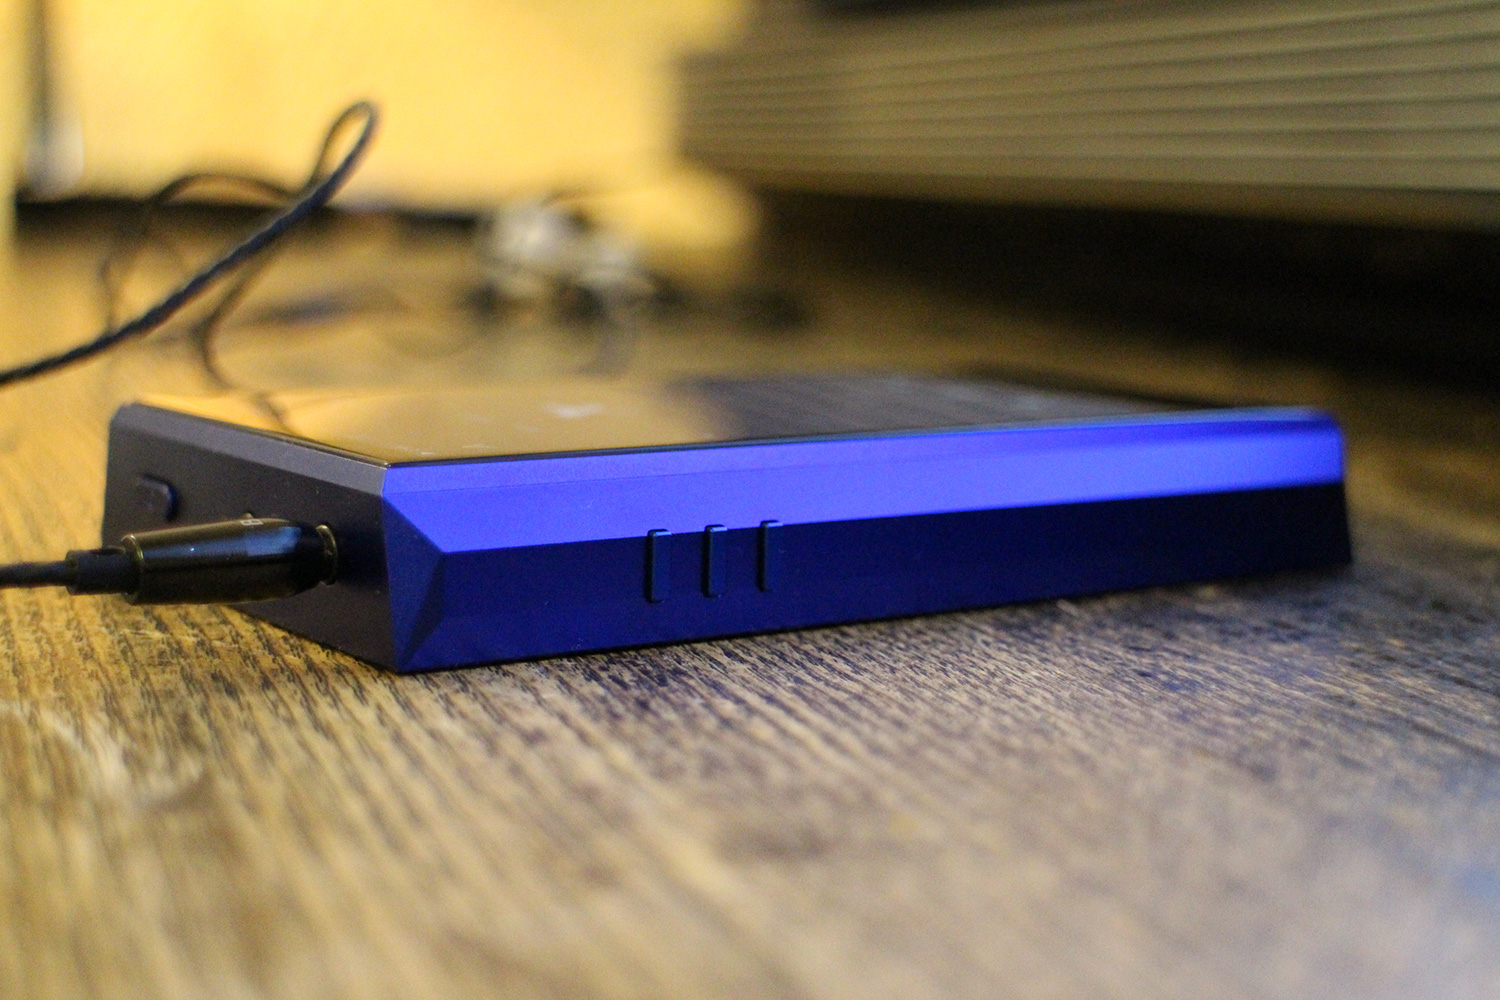 Astell & Kern SP1000M Hands-on Review | Digital Trends